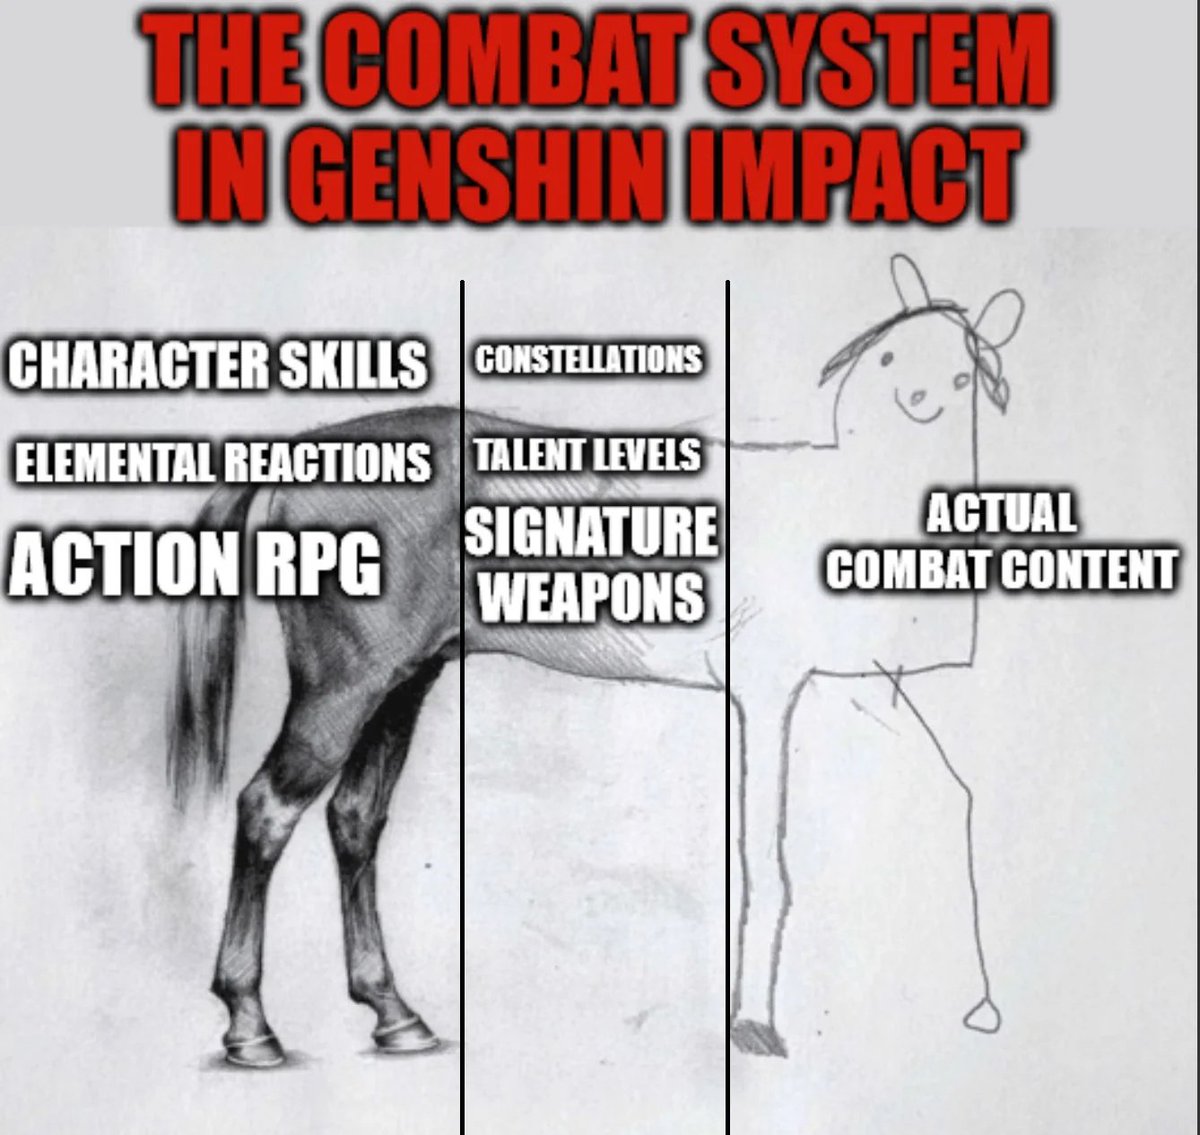 Such a unique combat system, and the best we have is a circular chamber with a timer slapped onto it

©️ u/Grimstarzz

#Genshinlmpact #Genshin #GenshinMemes